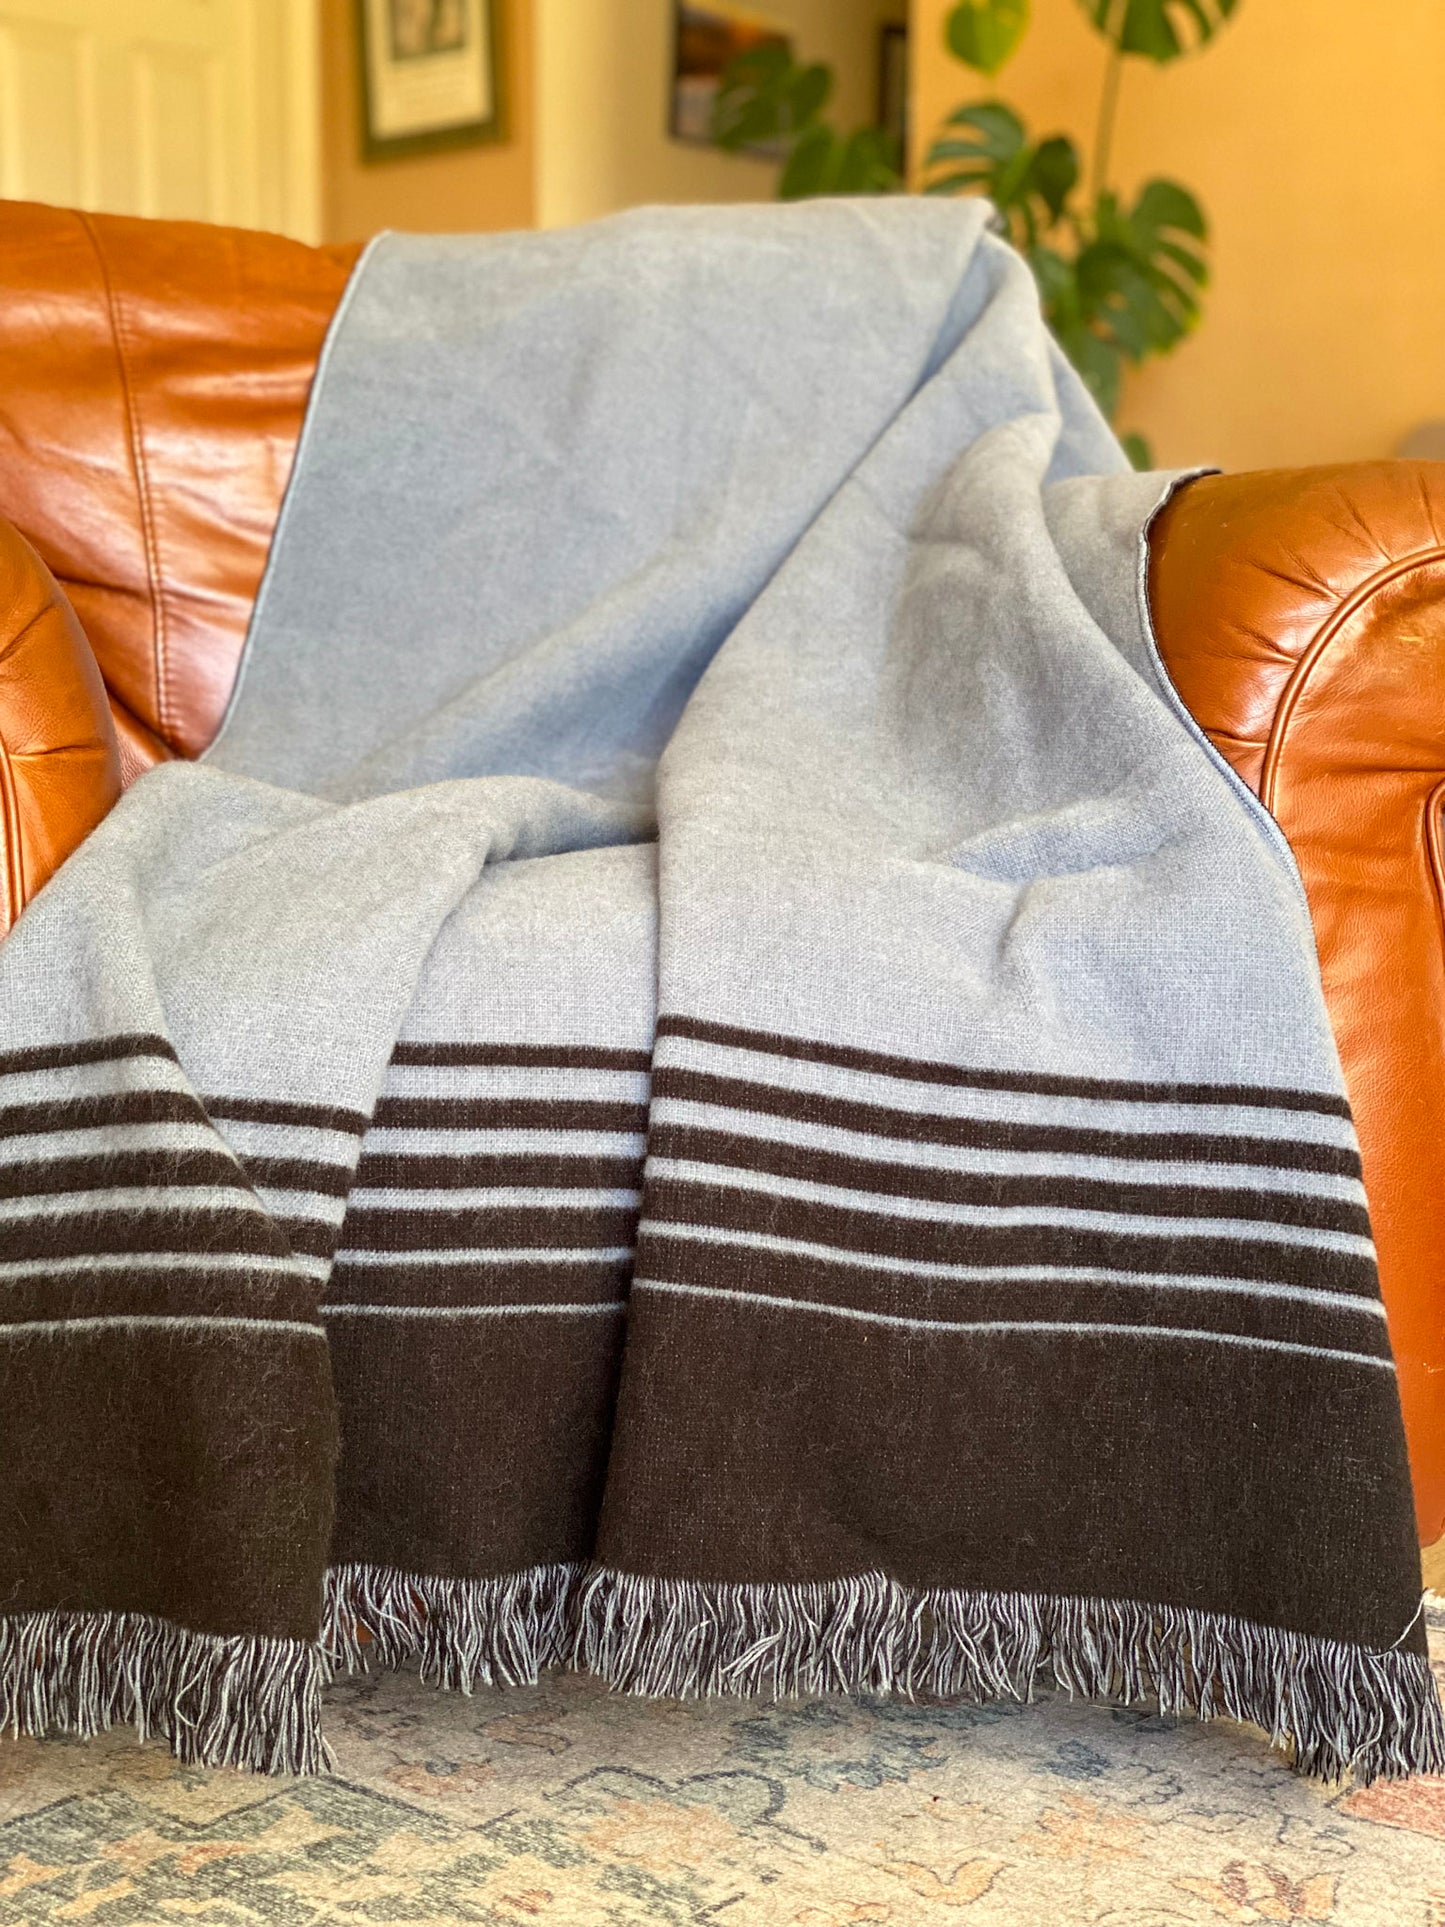 Black and Gray Woven Microfiber Striped Throw Blanket with Fringe